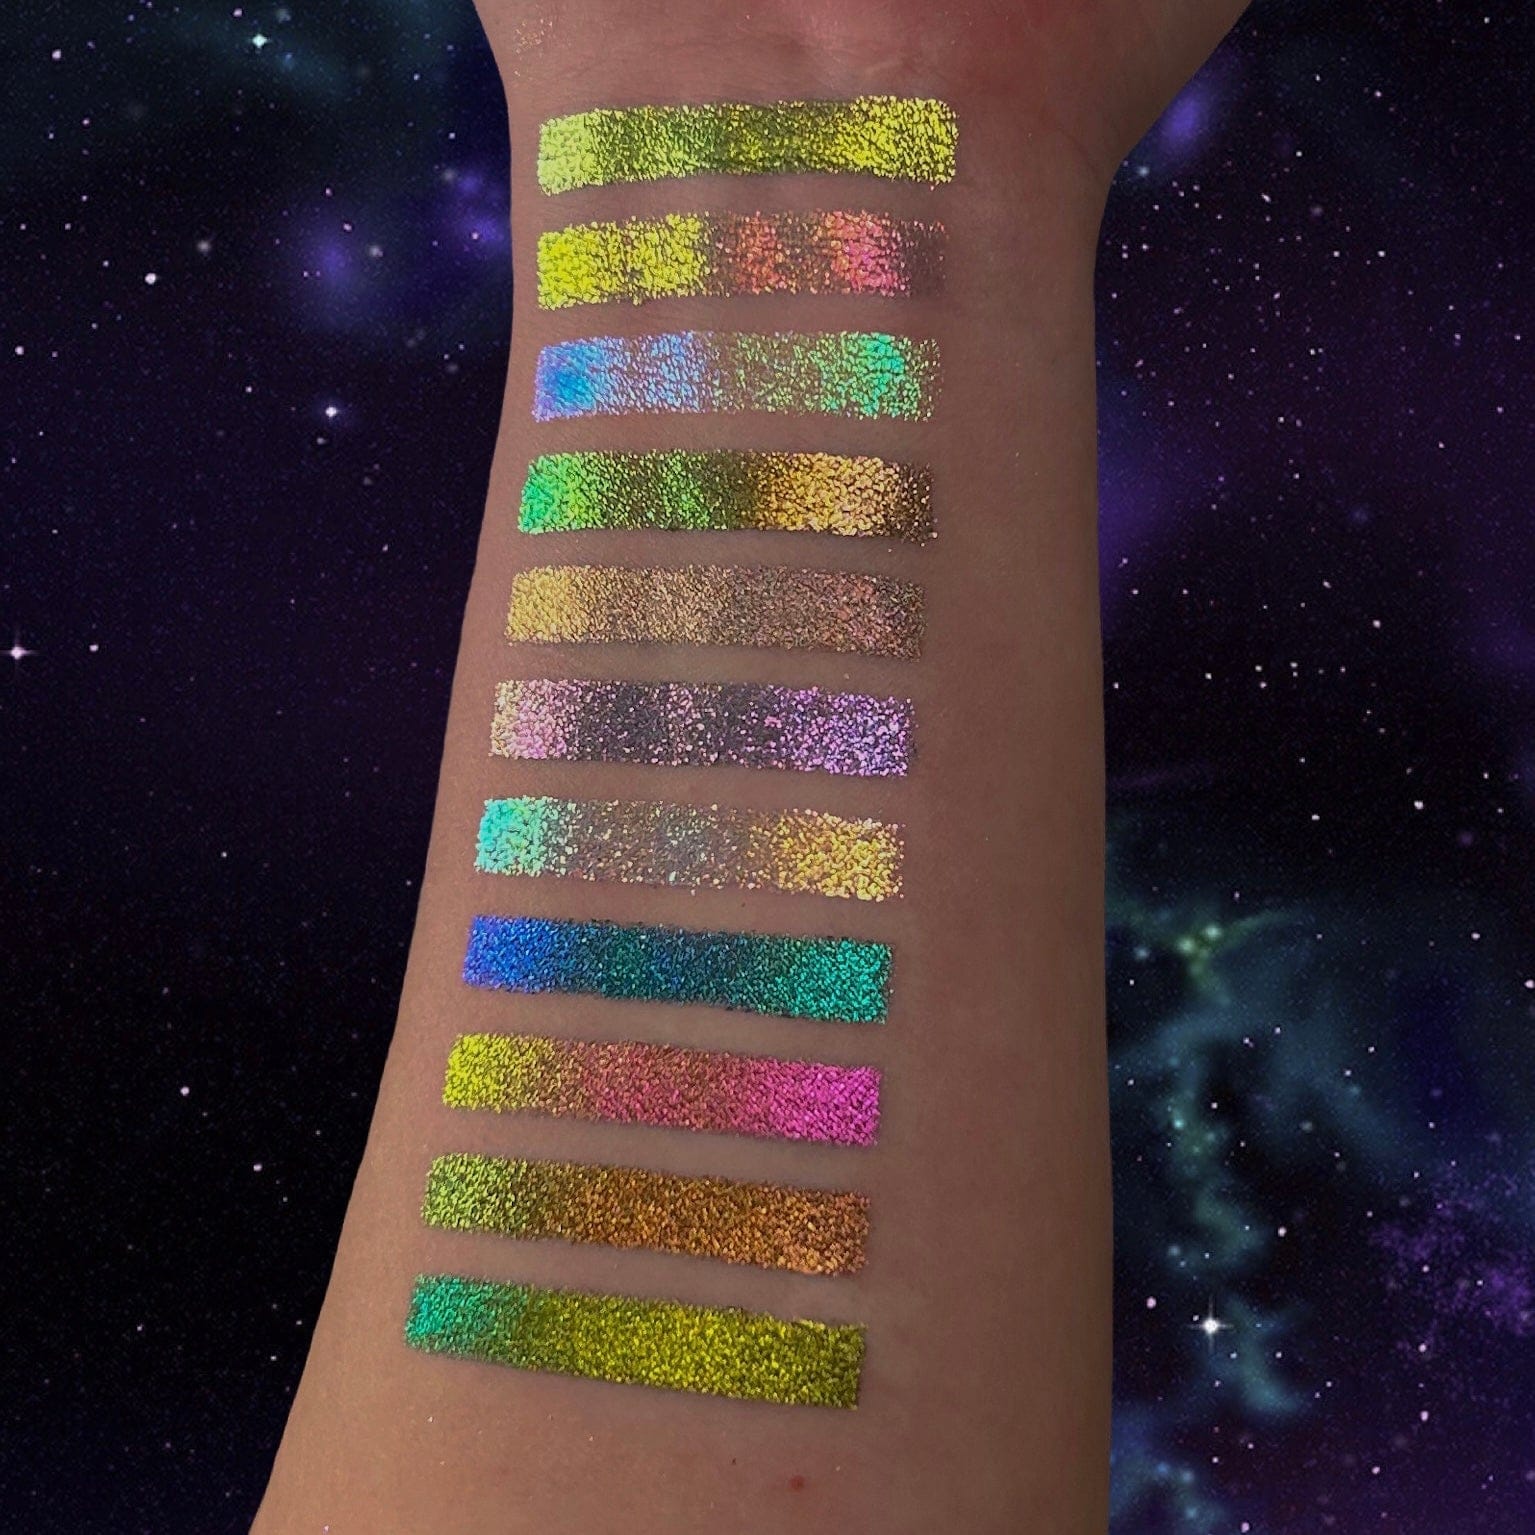 "Get Daring and Beautiful Looks with Our Multi-Chrome Pressed Pigment Eyeshadows - Order Now!"